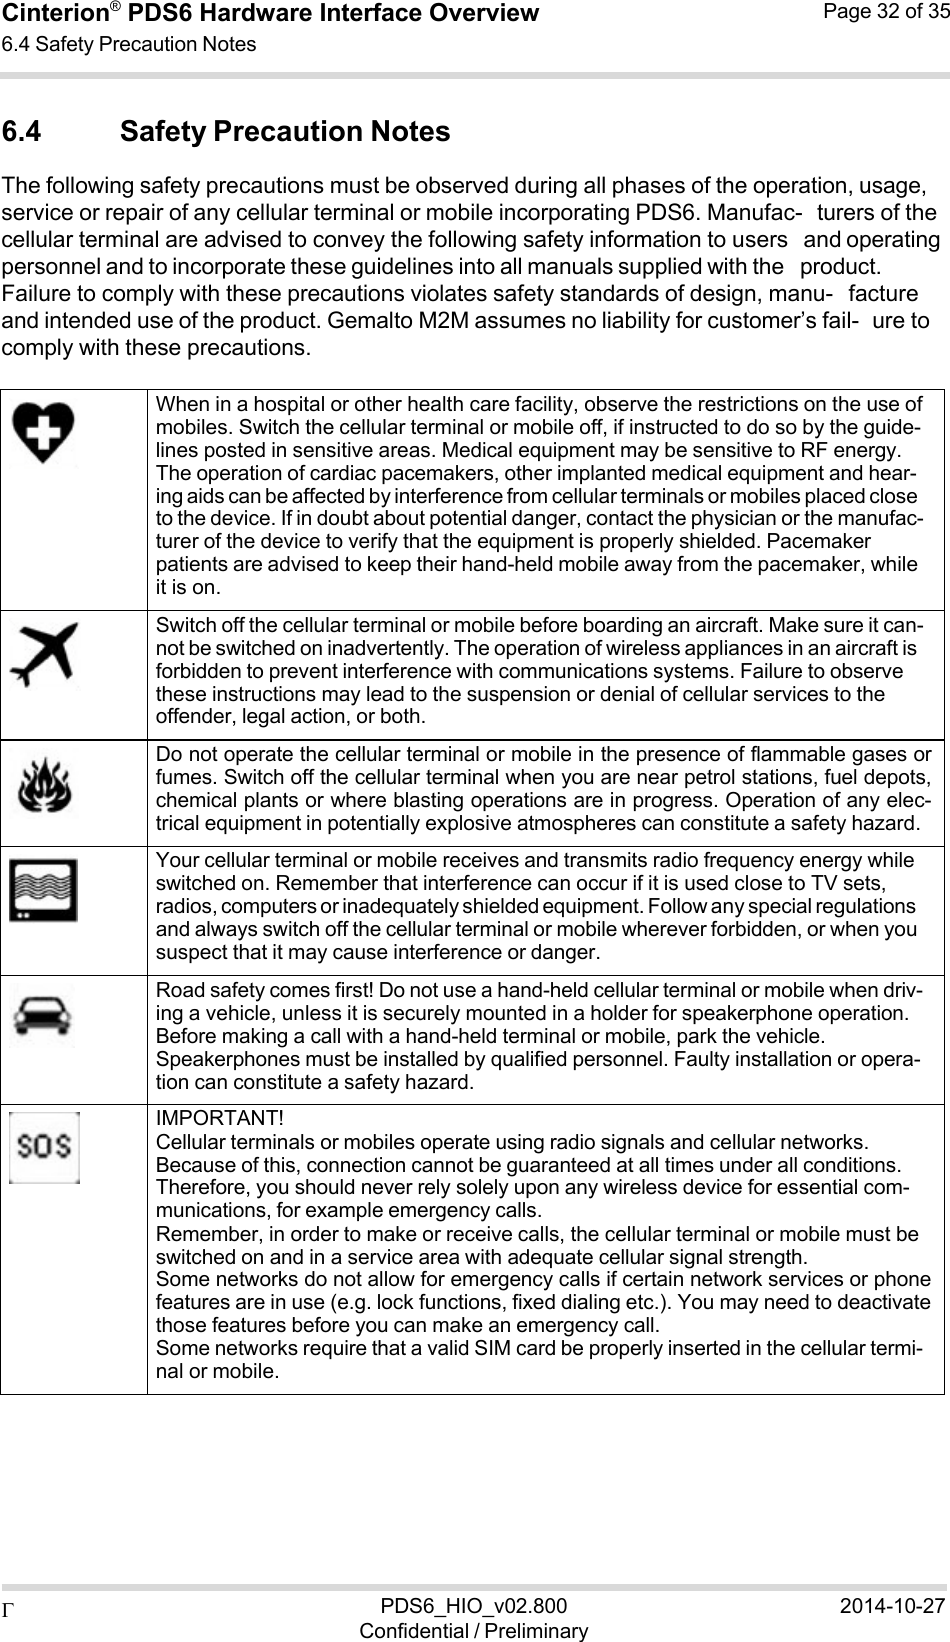  PDS6_HIO_v02.800Confidential / Preliminary2014-10-27Cinterion®  PDS6 Hardware Interface Overview 6.4 Safety Precaution Notes Page 32 of 35   6.4 Safety Precaution Notes The following safety precautions must be observed during all phases of the operation, usage, service or repair of any cellular terminal or mobile incorporating PDS6. Manufac- turers of the cellular terminal are advised to convey the following safety information to users and operating personnel and to incorporate these guidelines into all manuals supplied with the product. Failure to comply with these precautions violates safety standards of design, manu- facture and intended use of the product. Gemalto M2M assumes no liability for customer’s fail- ure to comply with these precautions.         When in a hospital or other health care facility, observe the restrictions on the use of mobiles. Switch the cellular terminal or mobile off, if instructed to do so by the guide- lines posted in sensitive areas. Medical equipment may be sensitive to RF energy. The operation of cardiac pacemakers, other implanted medical equipment and hear- ing aids can be affected by interference from cellular terminals or mobiles placed close to the device. If in doubt about potential danger, contact the physician or the manufac- turer of the device to verify that the equipment is properly shielded. Pacemaker patients are advised to keep their hand-held mobile away from the pacemaker, while it is on.     Switch off the cellular terminal or mobile before boarding an aircraft. Make sure it can- not be switched on inadvertently. The operation of wireless appliances in an aircraft is forbidden to prevent interference with communications systems. Failure to observe these instructions may lead to the suspension or denial of cellular services to the offender, legal action, or both.    Do not operate the cellular terminal or mobile in the presence of flammable gases orfumes. Switch off the cellular terminal when you are near petrol stations, fuel depots,chemical plants or where blasting operations are in progress. Operation of any elec-trical equipment in potentially explosive atmospheres can constitute a safety hazard.     Your cellular terminal or mobile receives and transmits radio frequency energy while switched on. Remember that interference can occur if it is used close to TV sets, radios, computers or inadequately shielded equipment. Follow any special regulations and always switch off the cellular terminal or mobile wherever forbidden, or when you suspect that it may cause interference or danger.     Road safety comes first! Do not use a hand-held cellular terminal or mobile when driv- ing a vehicle, unless it is securely mounted in a holder for speakerphone operation. Before making a call with a hand-held terminal or mobile, park the vehicle. Speakerphones must be installed by qualified personnel. Faulty installation or opera- tion can constitute a safety hazard.           IMPORTANT! Cellular terminals or mobiles operate using radio signals and cellular networks. Because of this, connection cannot be guaranteed at all times under all conditions. Therefore, you should never rely solely upon any wireless device for essential com- munications, for example emergency calls. Remember, in order to make or receive calls, the cellular terminal or mobile must be switched on and in a service area with adequate cellular signal strength. Some networks do not allow for emergency calls if certain network services or phonefeatures are in use (e.g. lock functions, fixed dialing etc.). You may need to deactivatethose features before you can make an emergency call. Some networks require that a valid SIM card be properly inserted in the cellular termi- nal or mobile. 